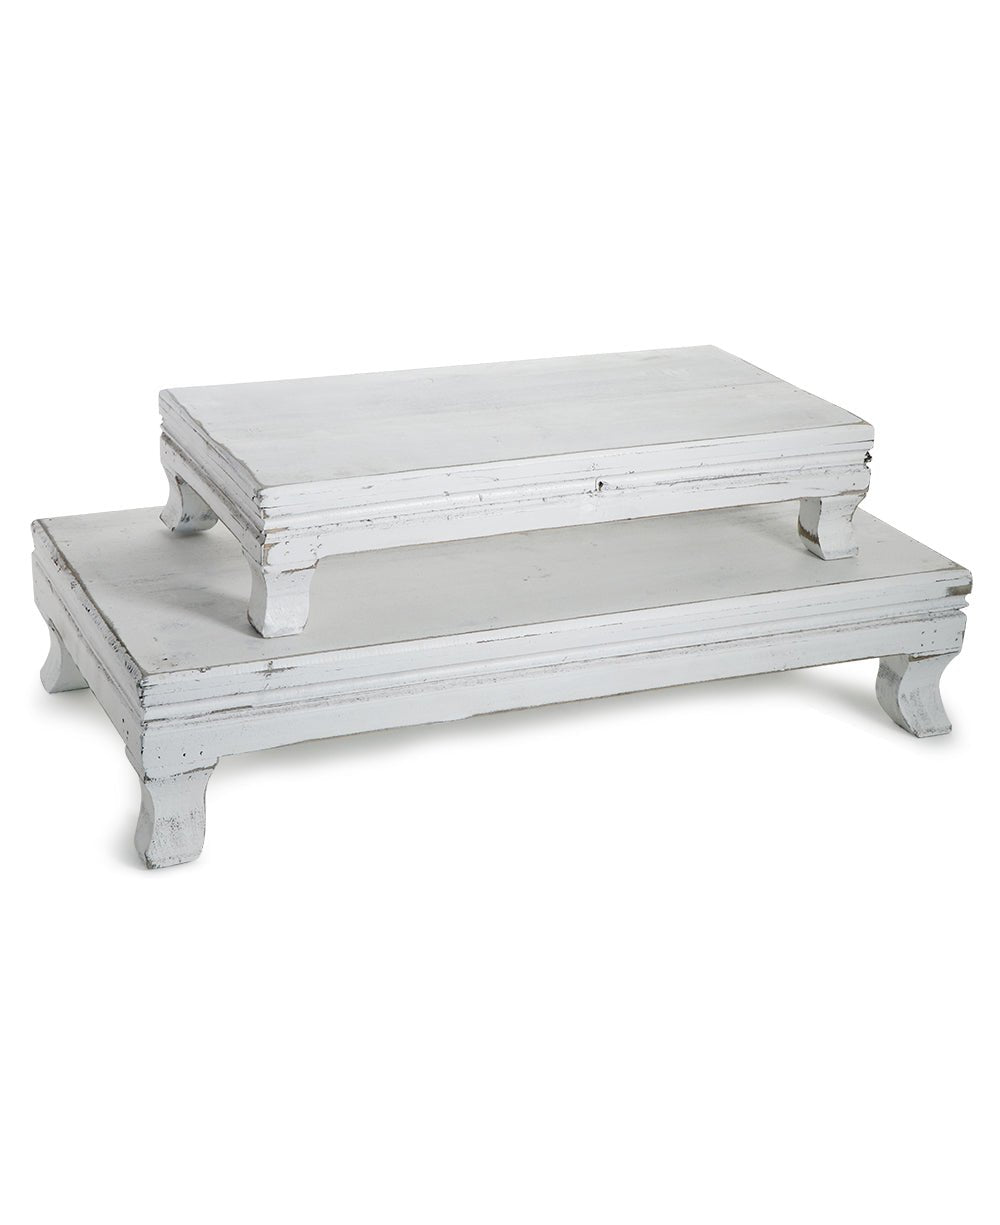 Distressed Farmhouse Design White Washed Pedestal Risers - Computer Risers & Stands Medium